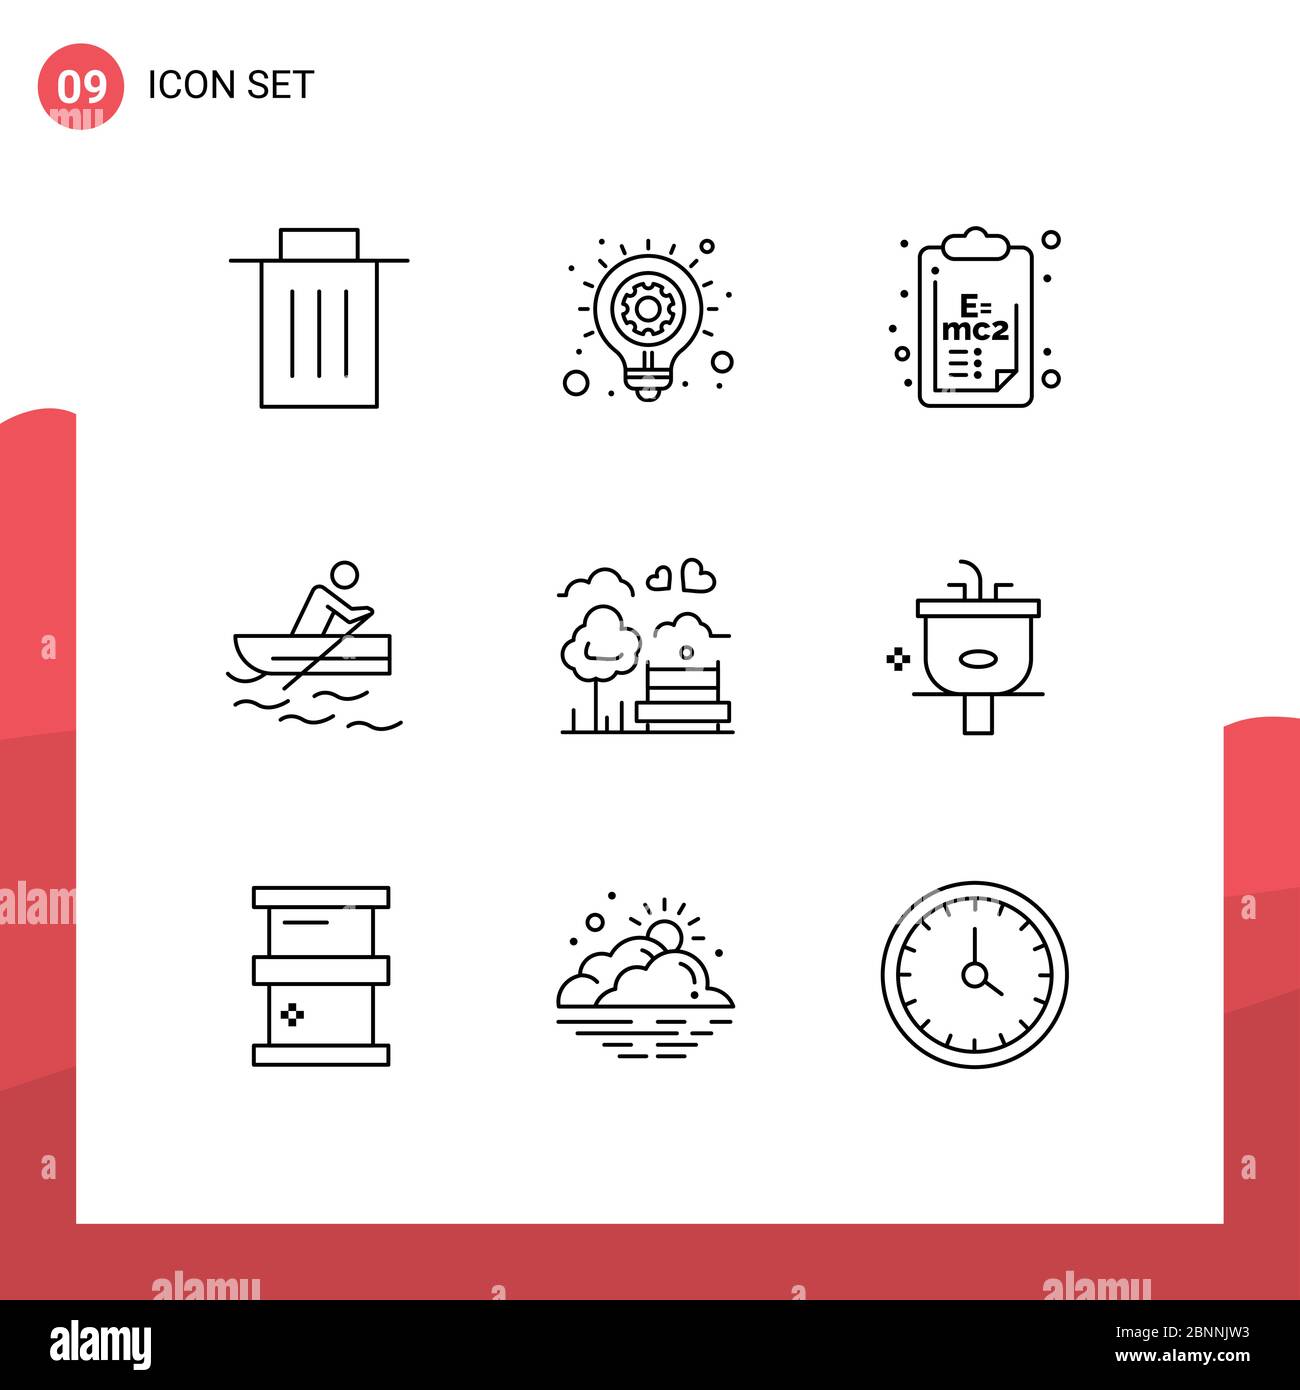 Mobile Interface Outline Set of 9 Pictograms of tree, water, chemistry, training, boat Editable Vector Design Elements Stock Vector